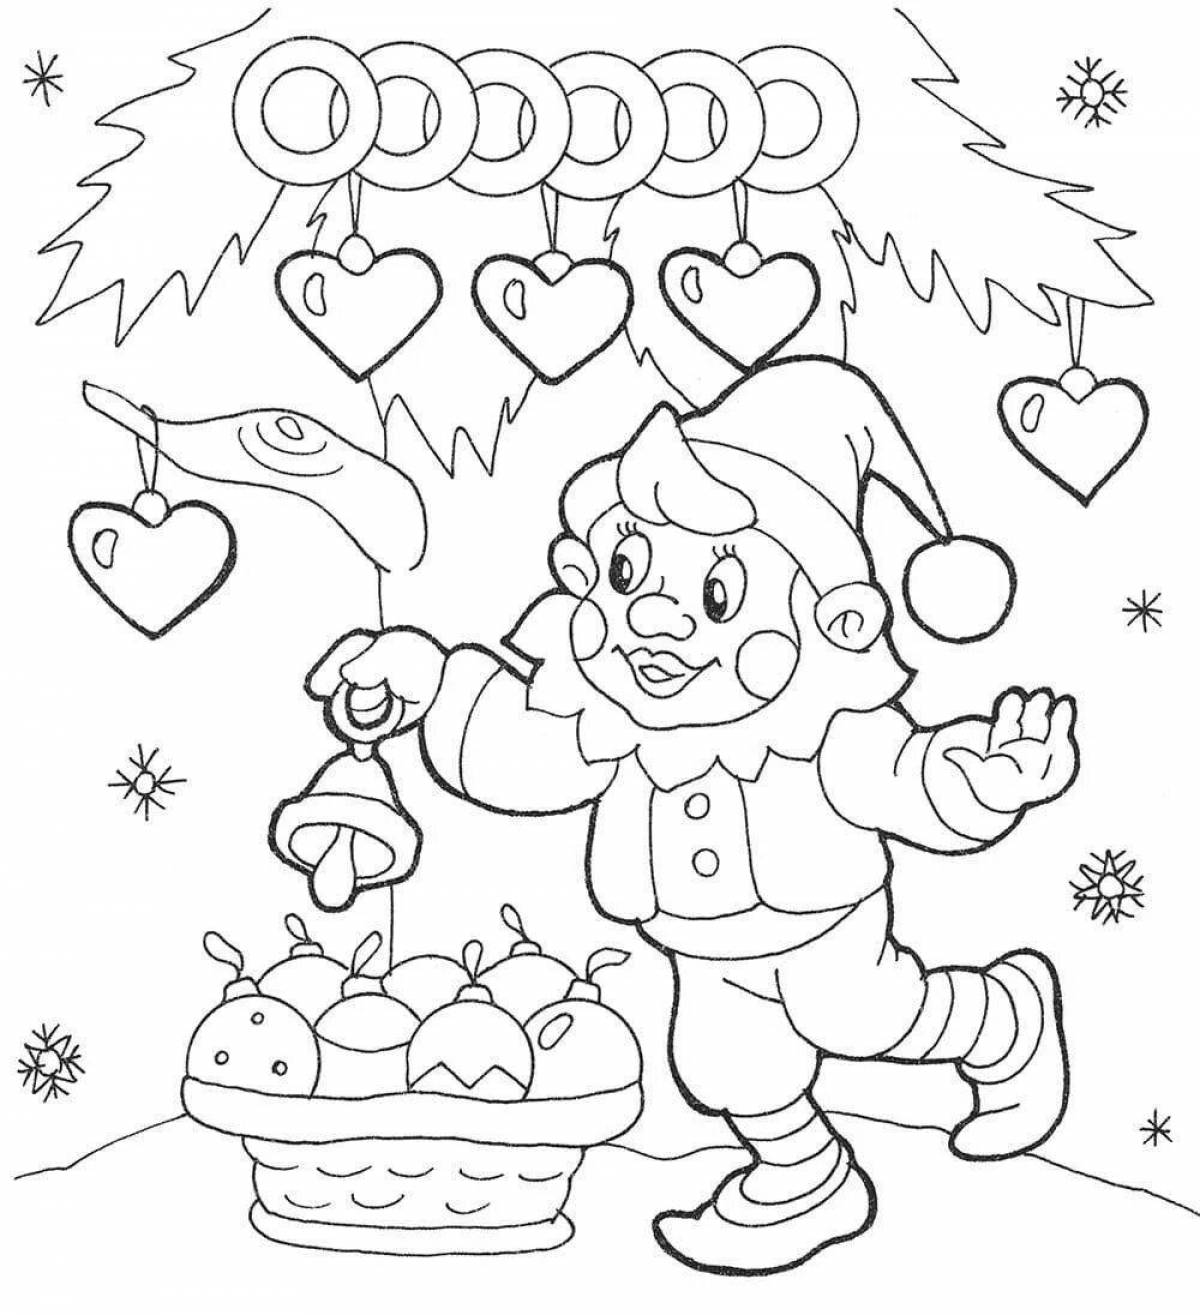 Blessed Christmas coloring book for kids 5-6 years old